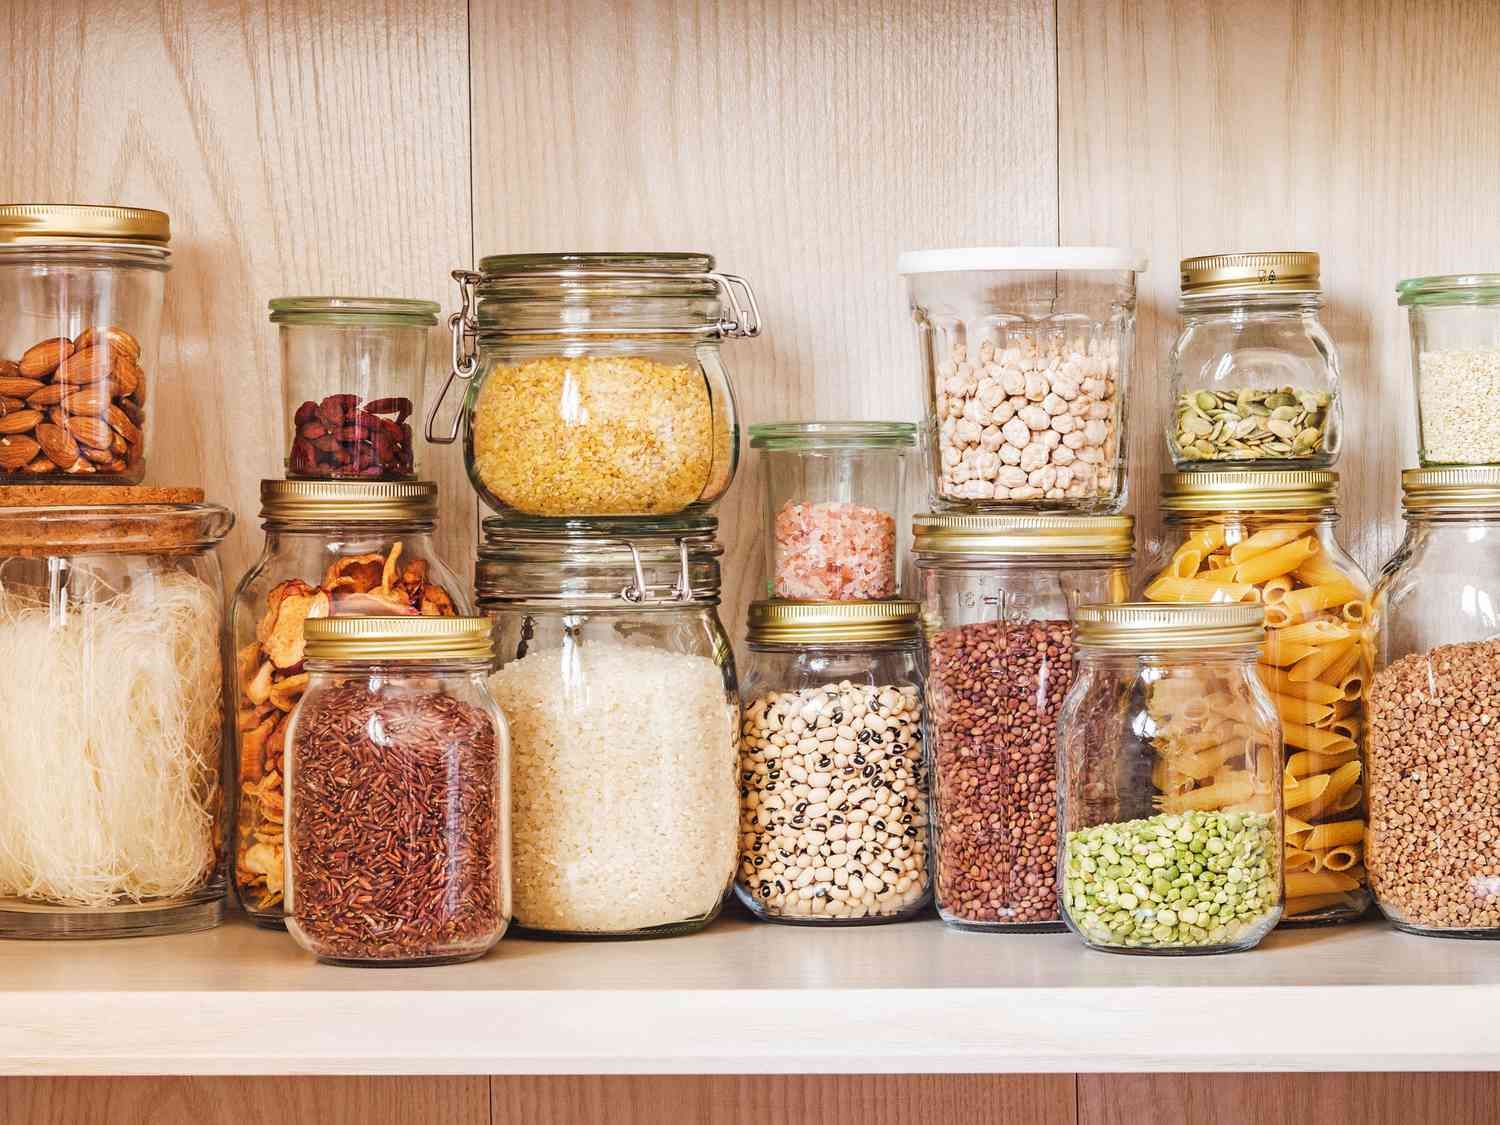 How To Store Dry Foods To Prevent Pests